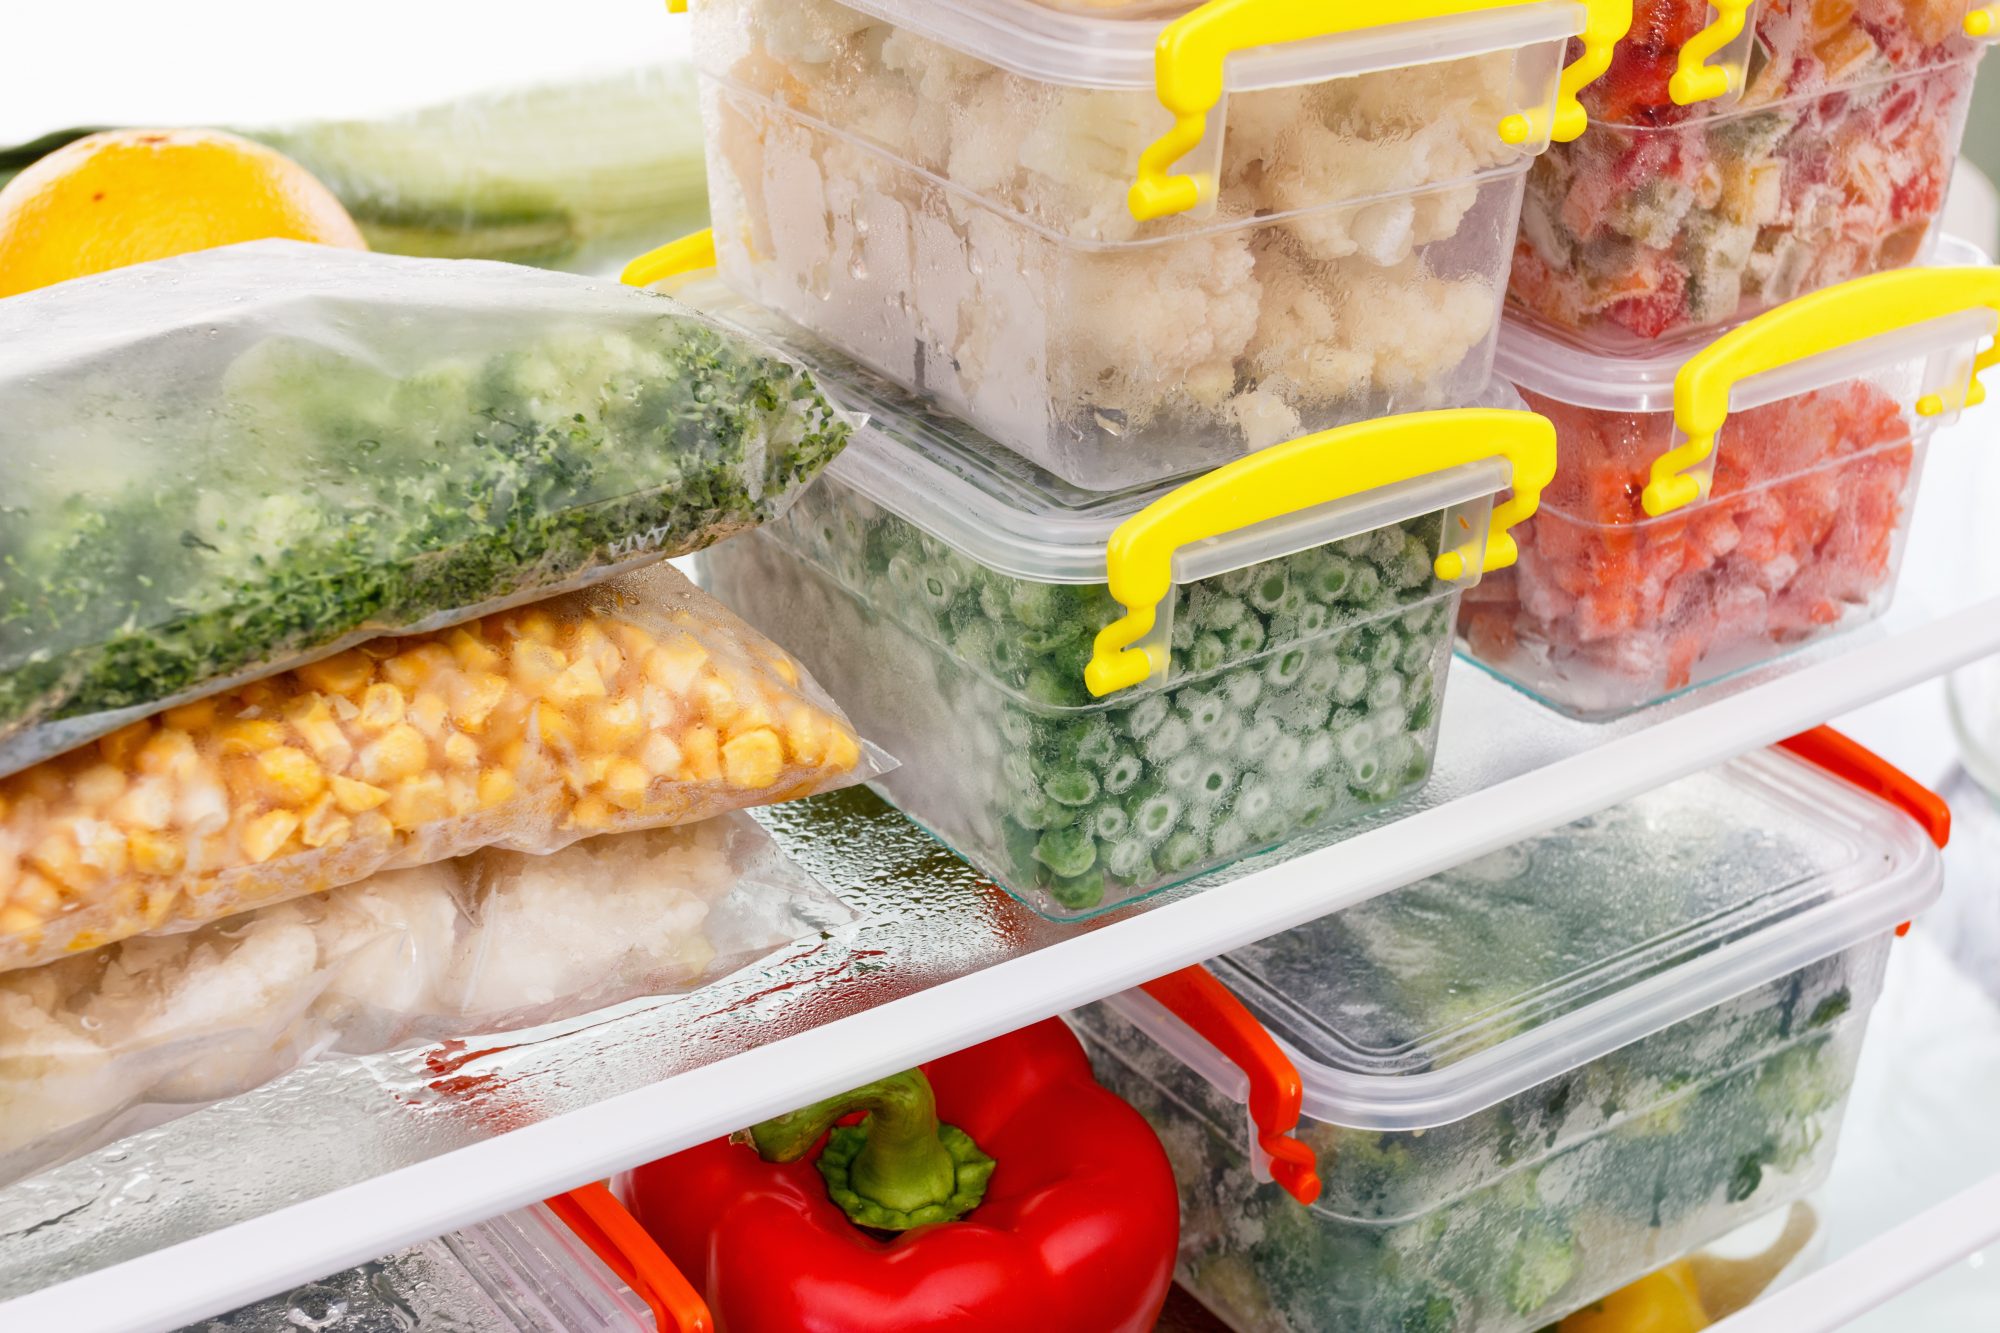 Is Frozen Food Bad For Your Health?